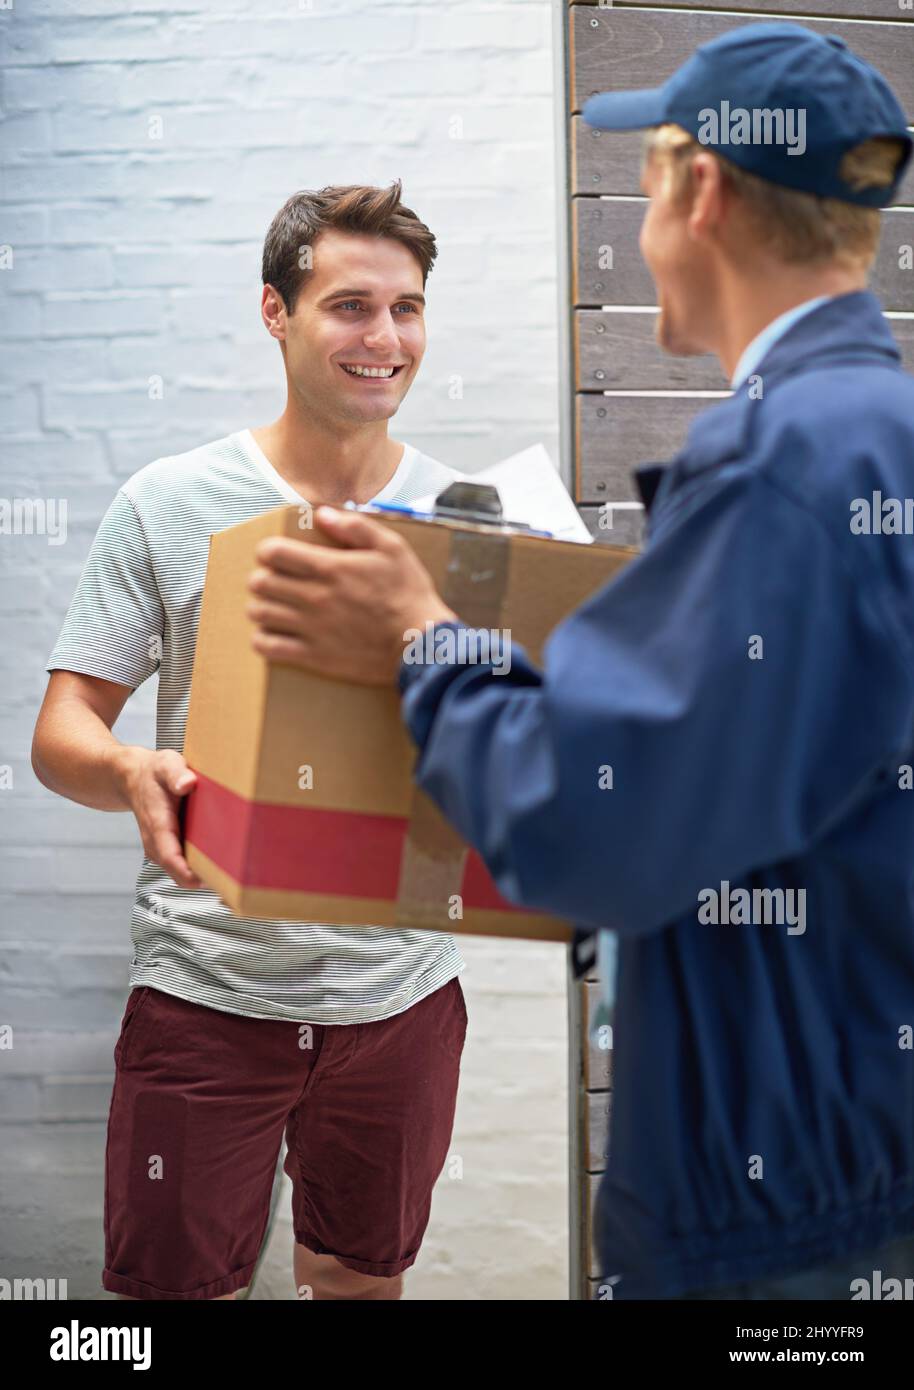 Receiving the last of his boxes. Shot of a young man receiving a cardboard box from a delivery man. Stock Photo